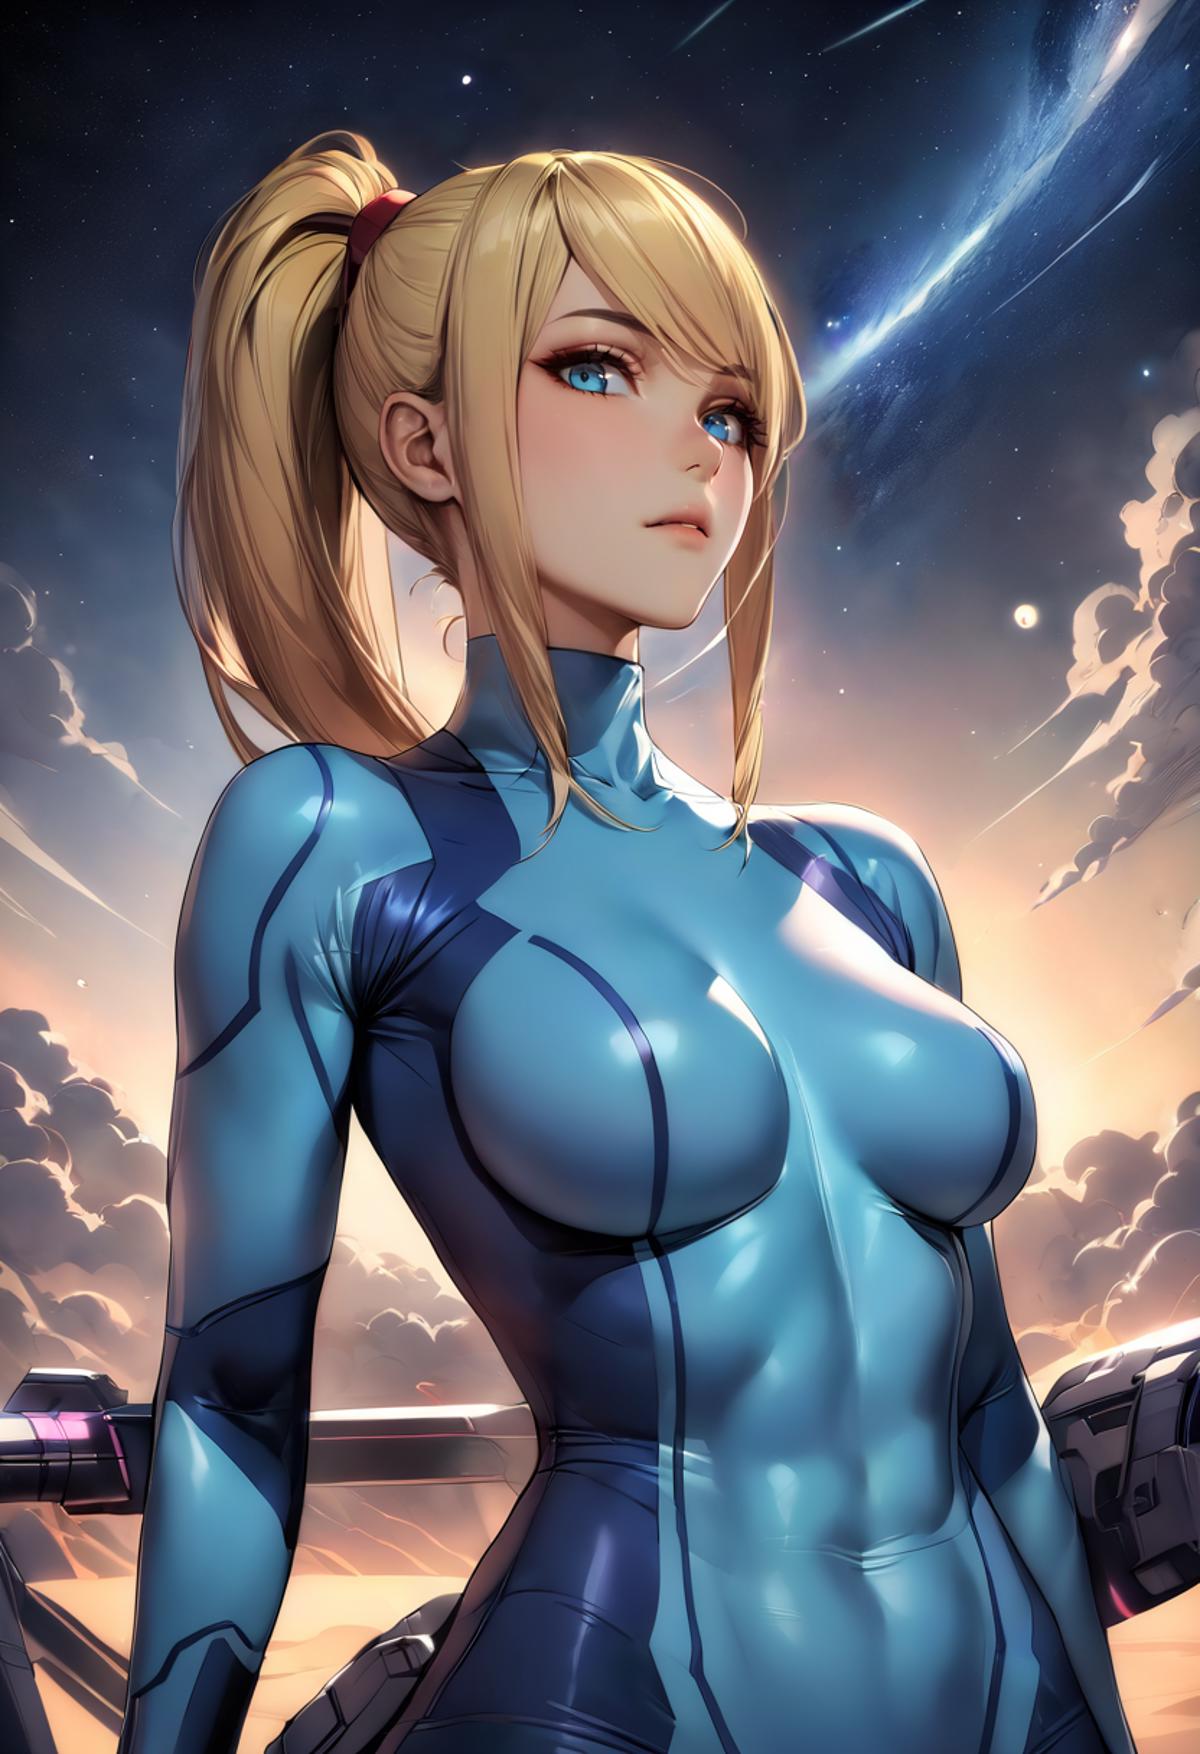 A sexy anime woman with blue eyes and a blue outfit.